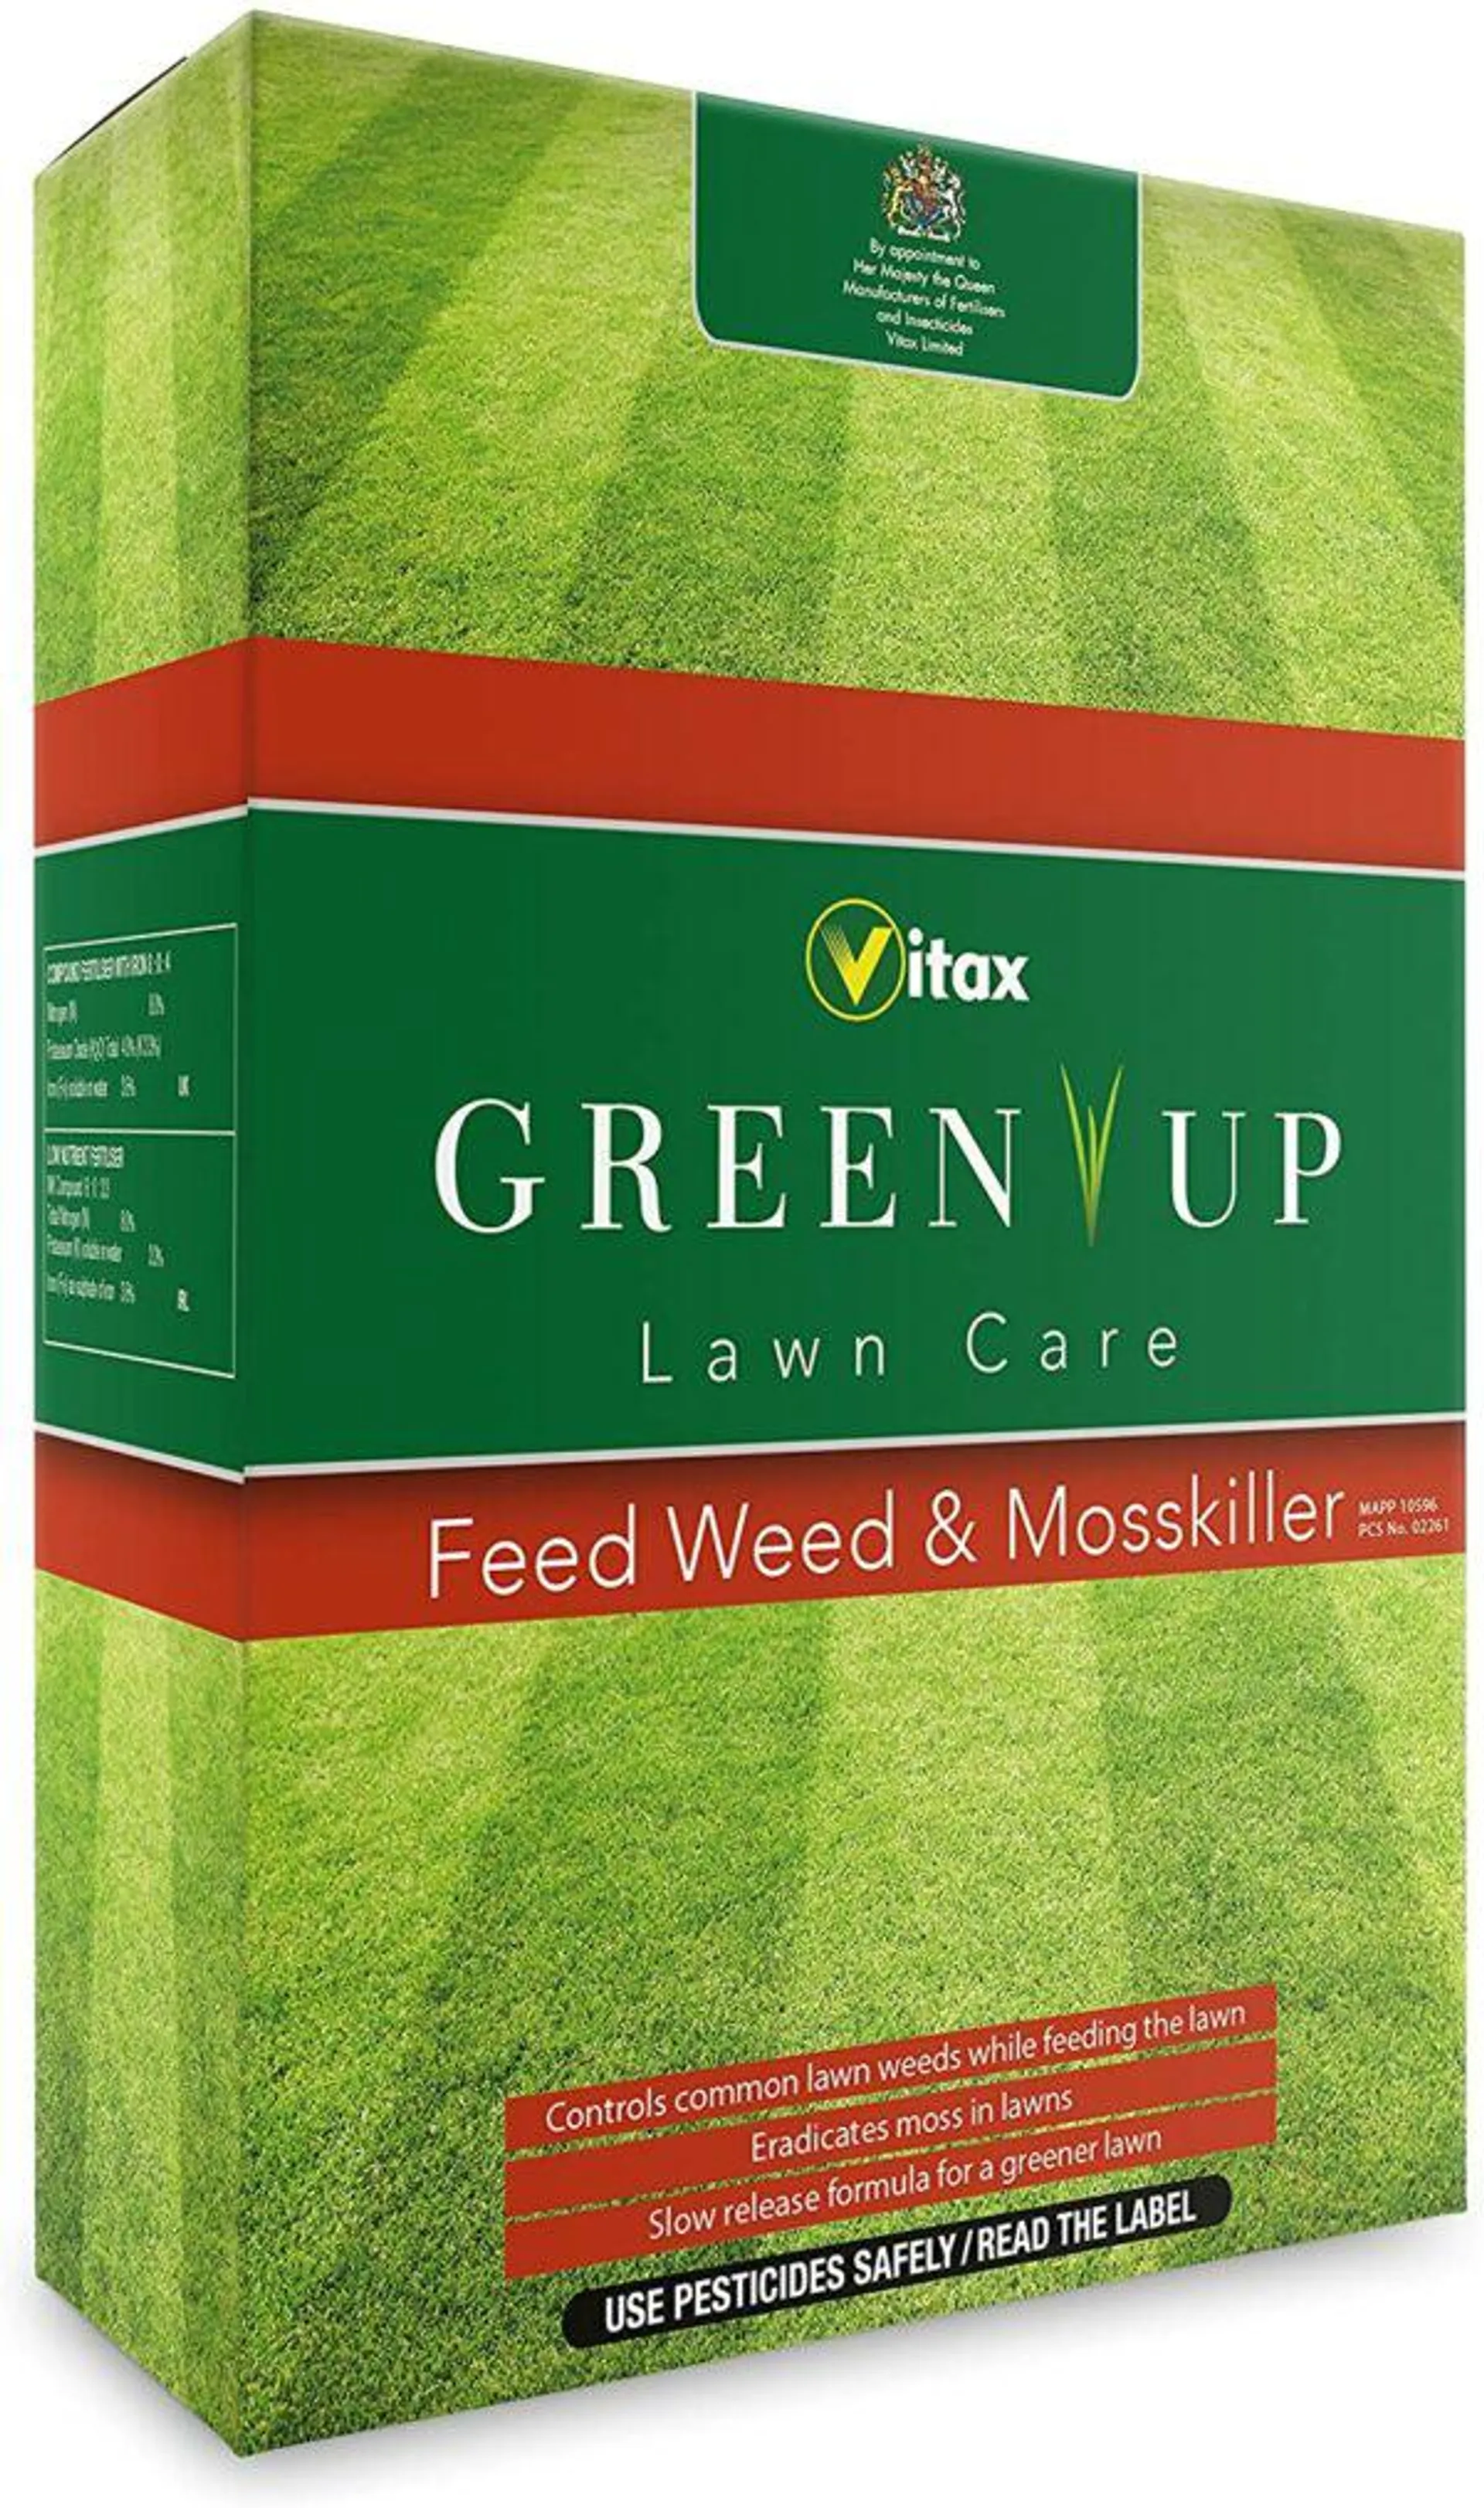 Vitax Lawn Weed Feed and Moss Killer Green Up Granules 3kg